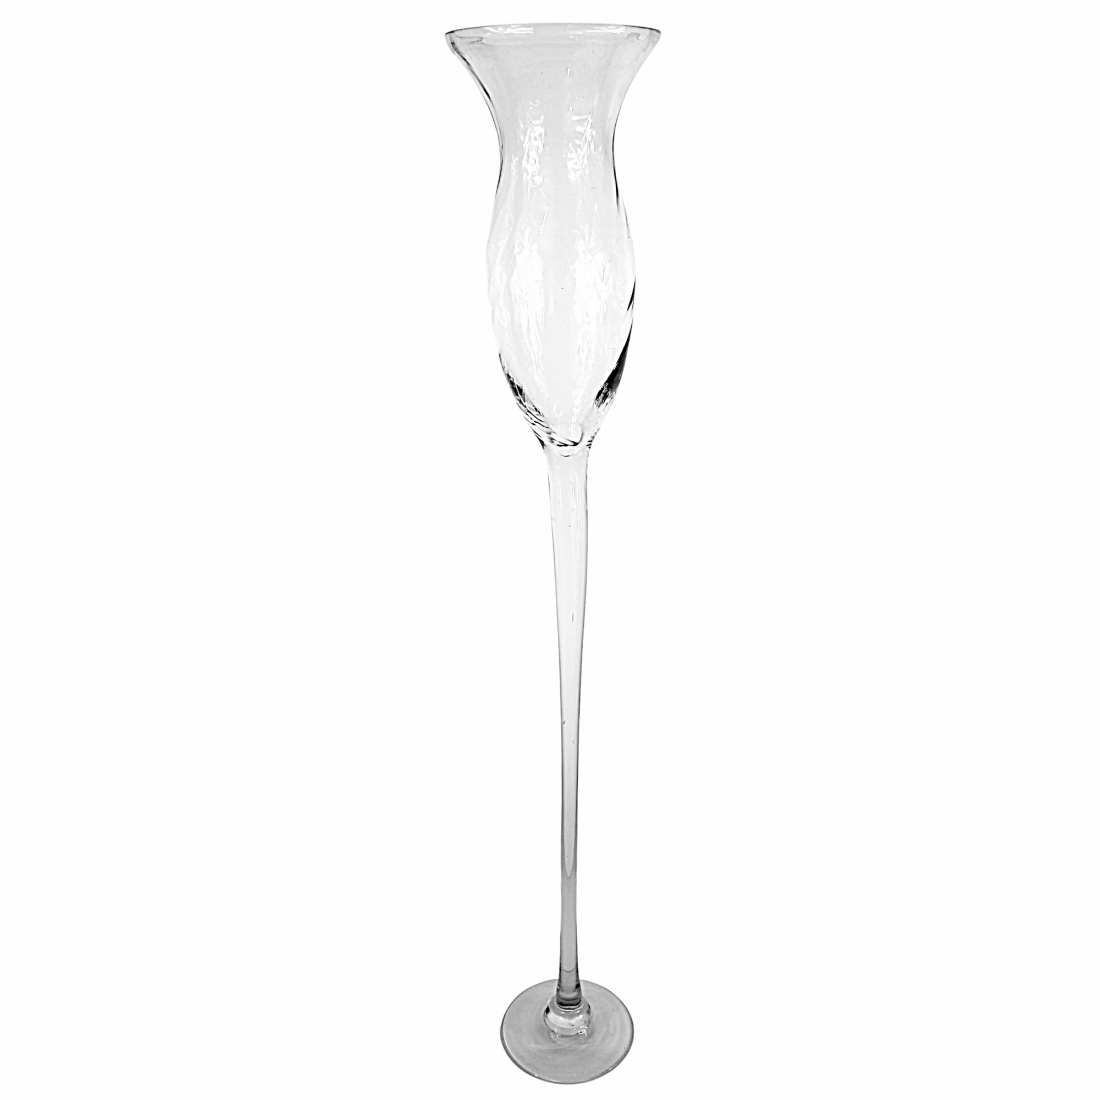 Flower vase rentals Clear glass vase 40 inches tall # 830529